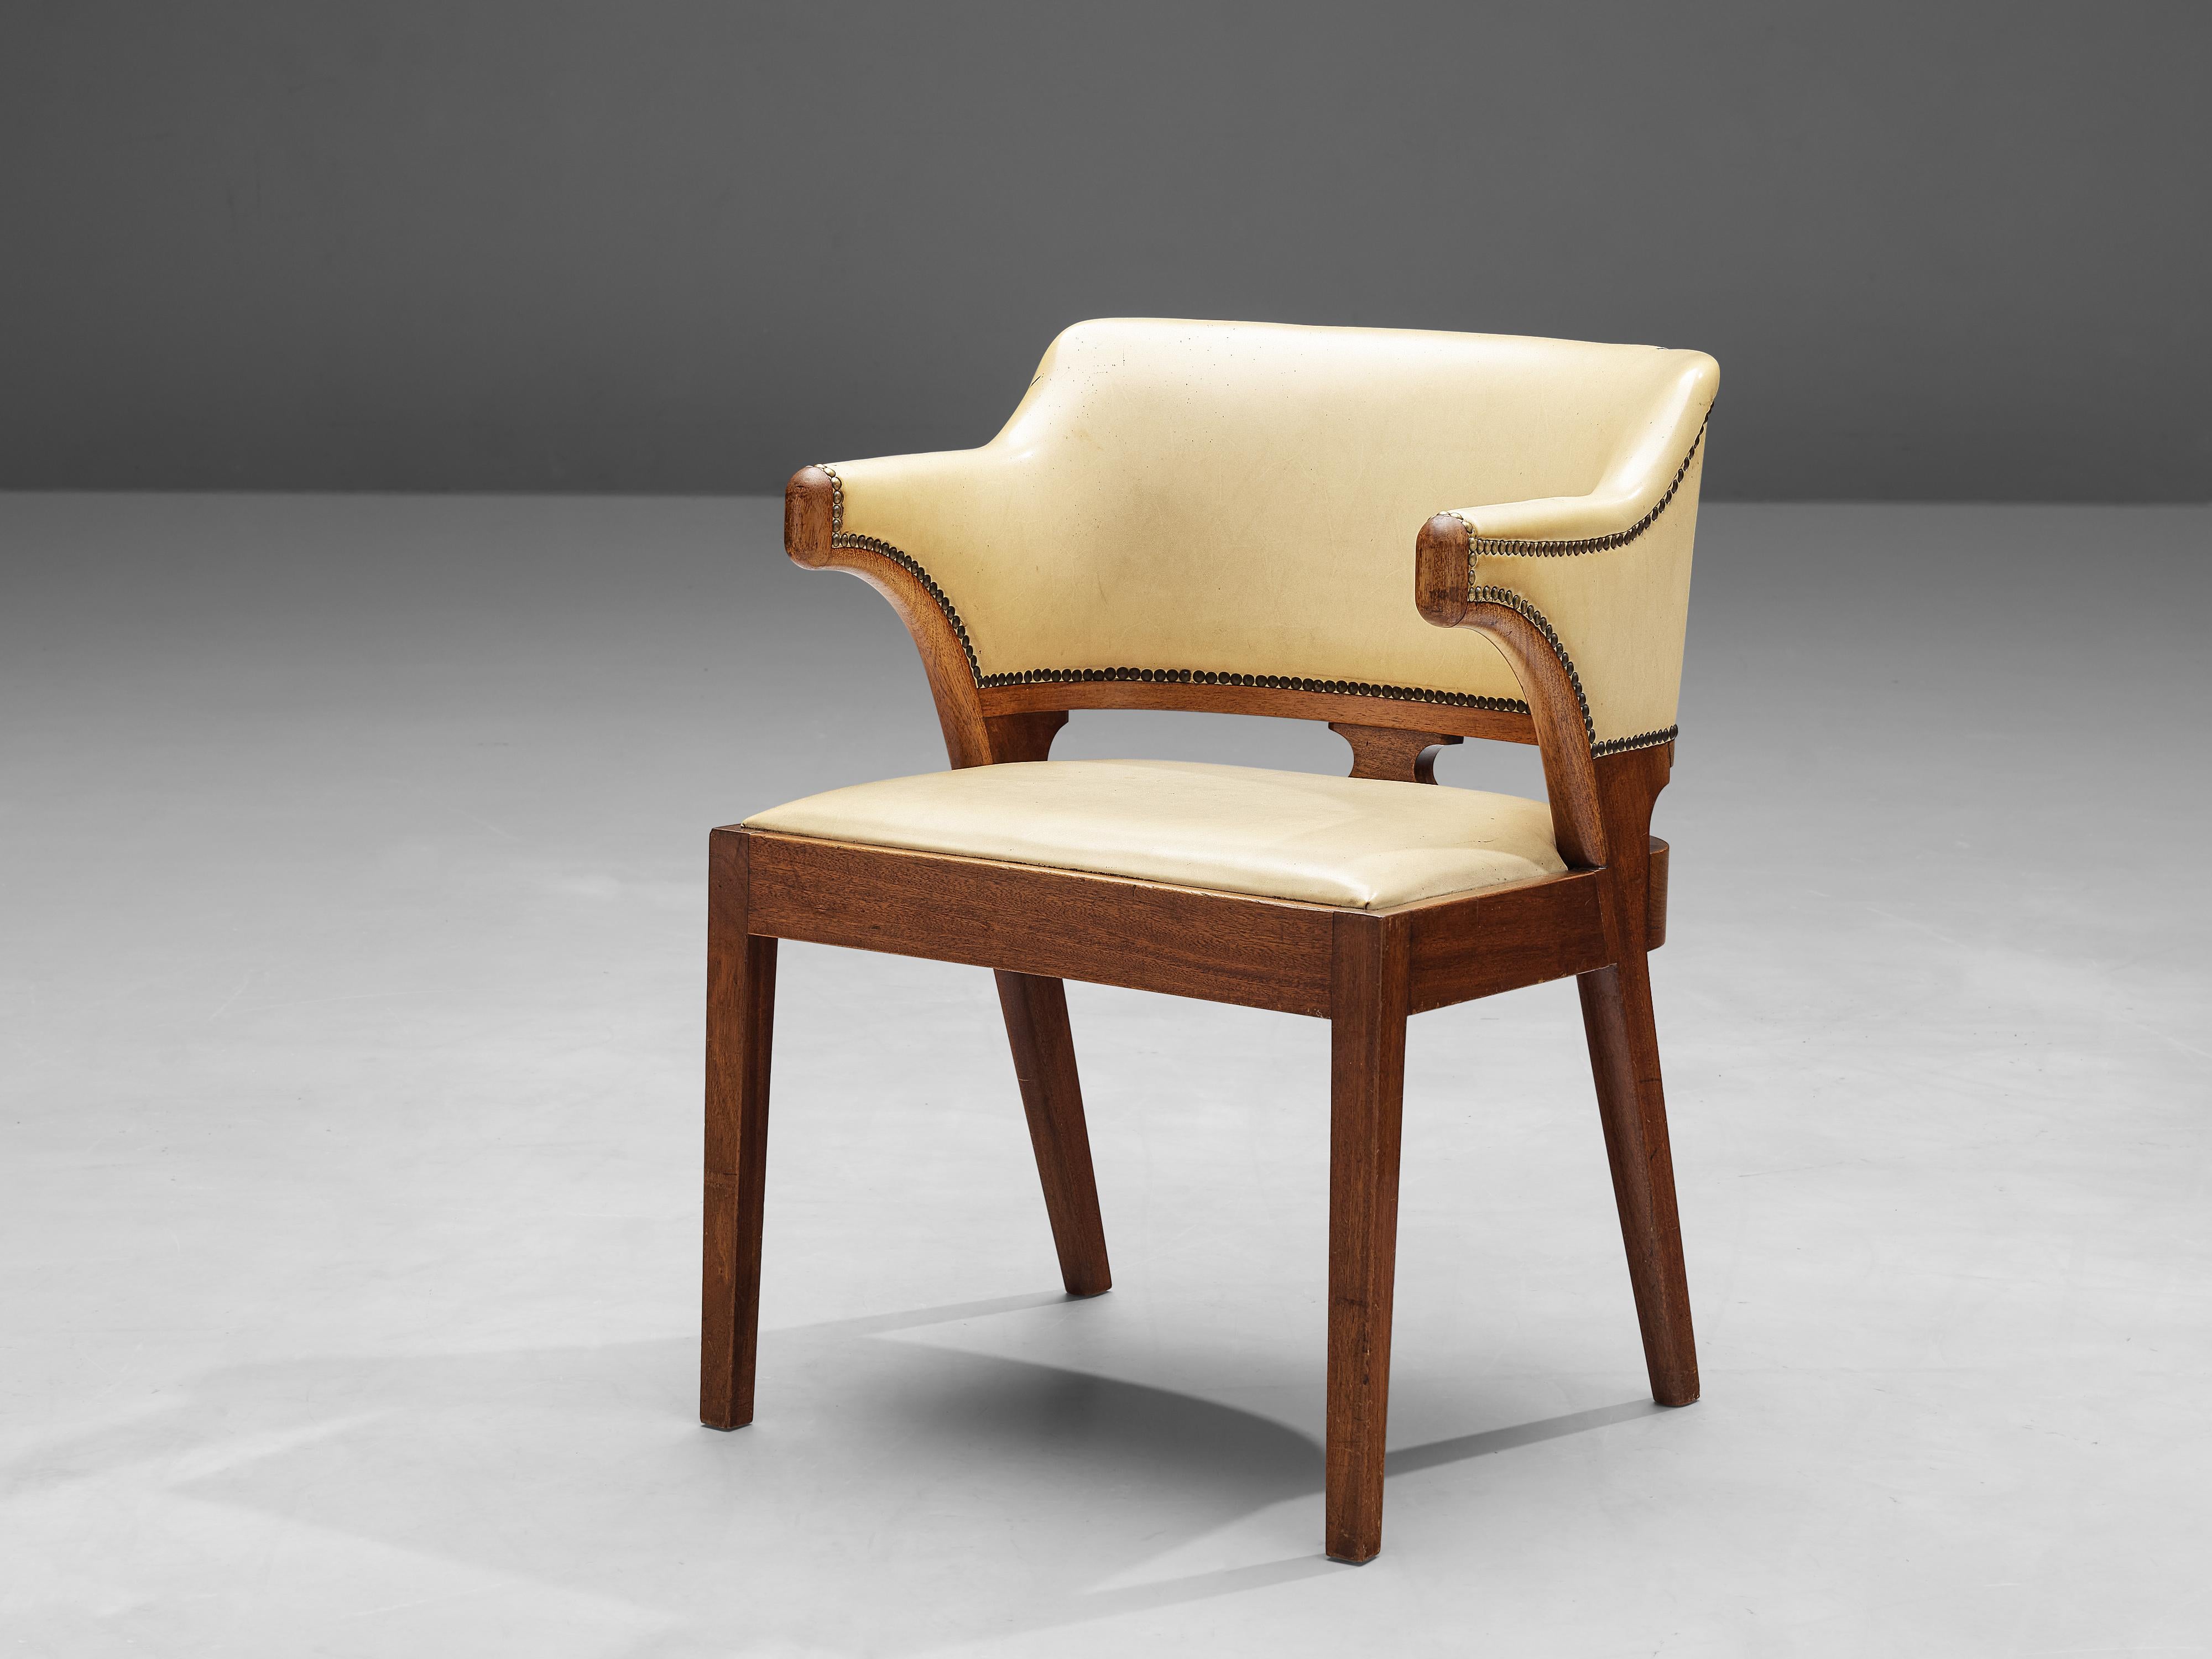 J.J.P. Oud for C.H. Eckhart, chair, mahogany, leather, brass, The Netherlands, 1930s

Elegant Dutch chair with cream leather designed by J.J.P. Oud for C.H. Eckhart. The chair has a sculptural quality which is created by the armrests that have a